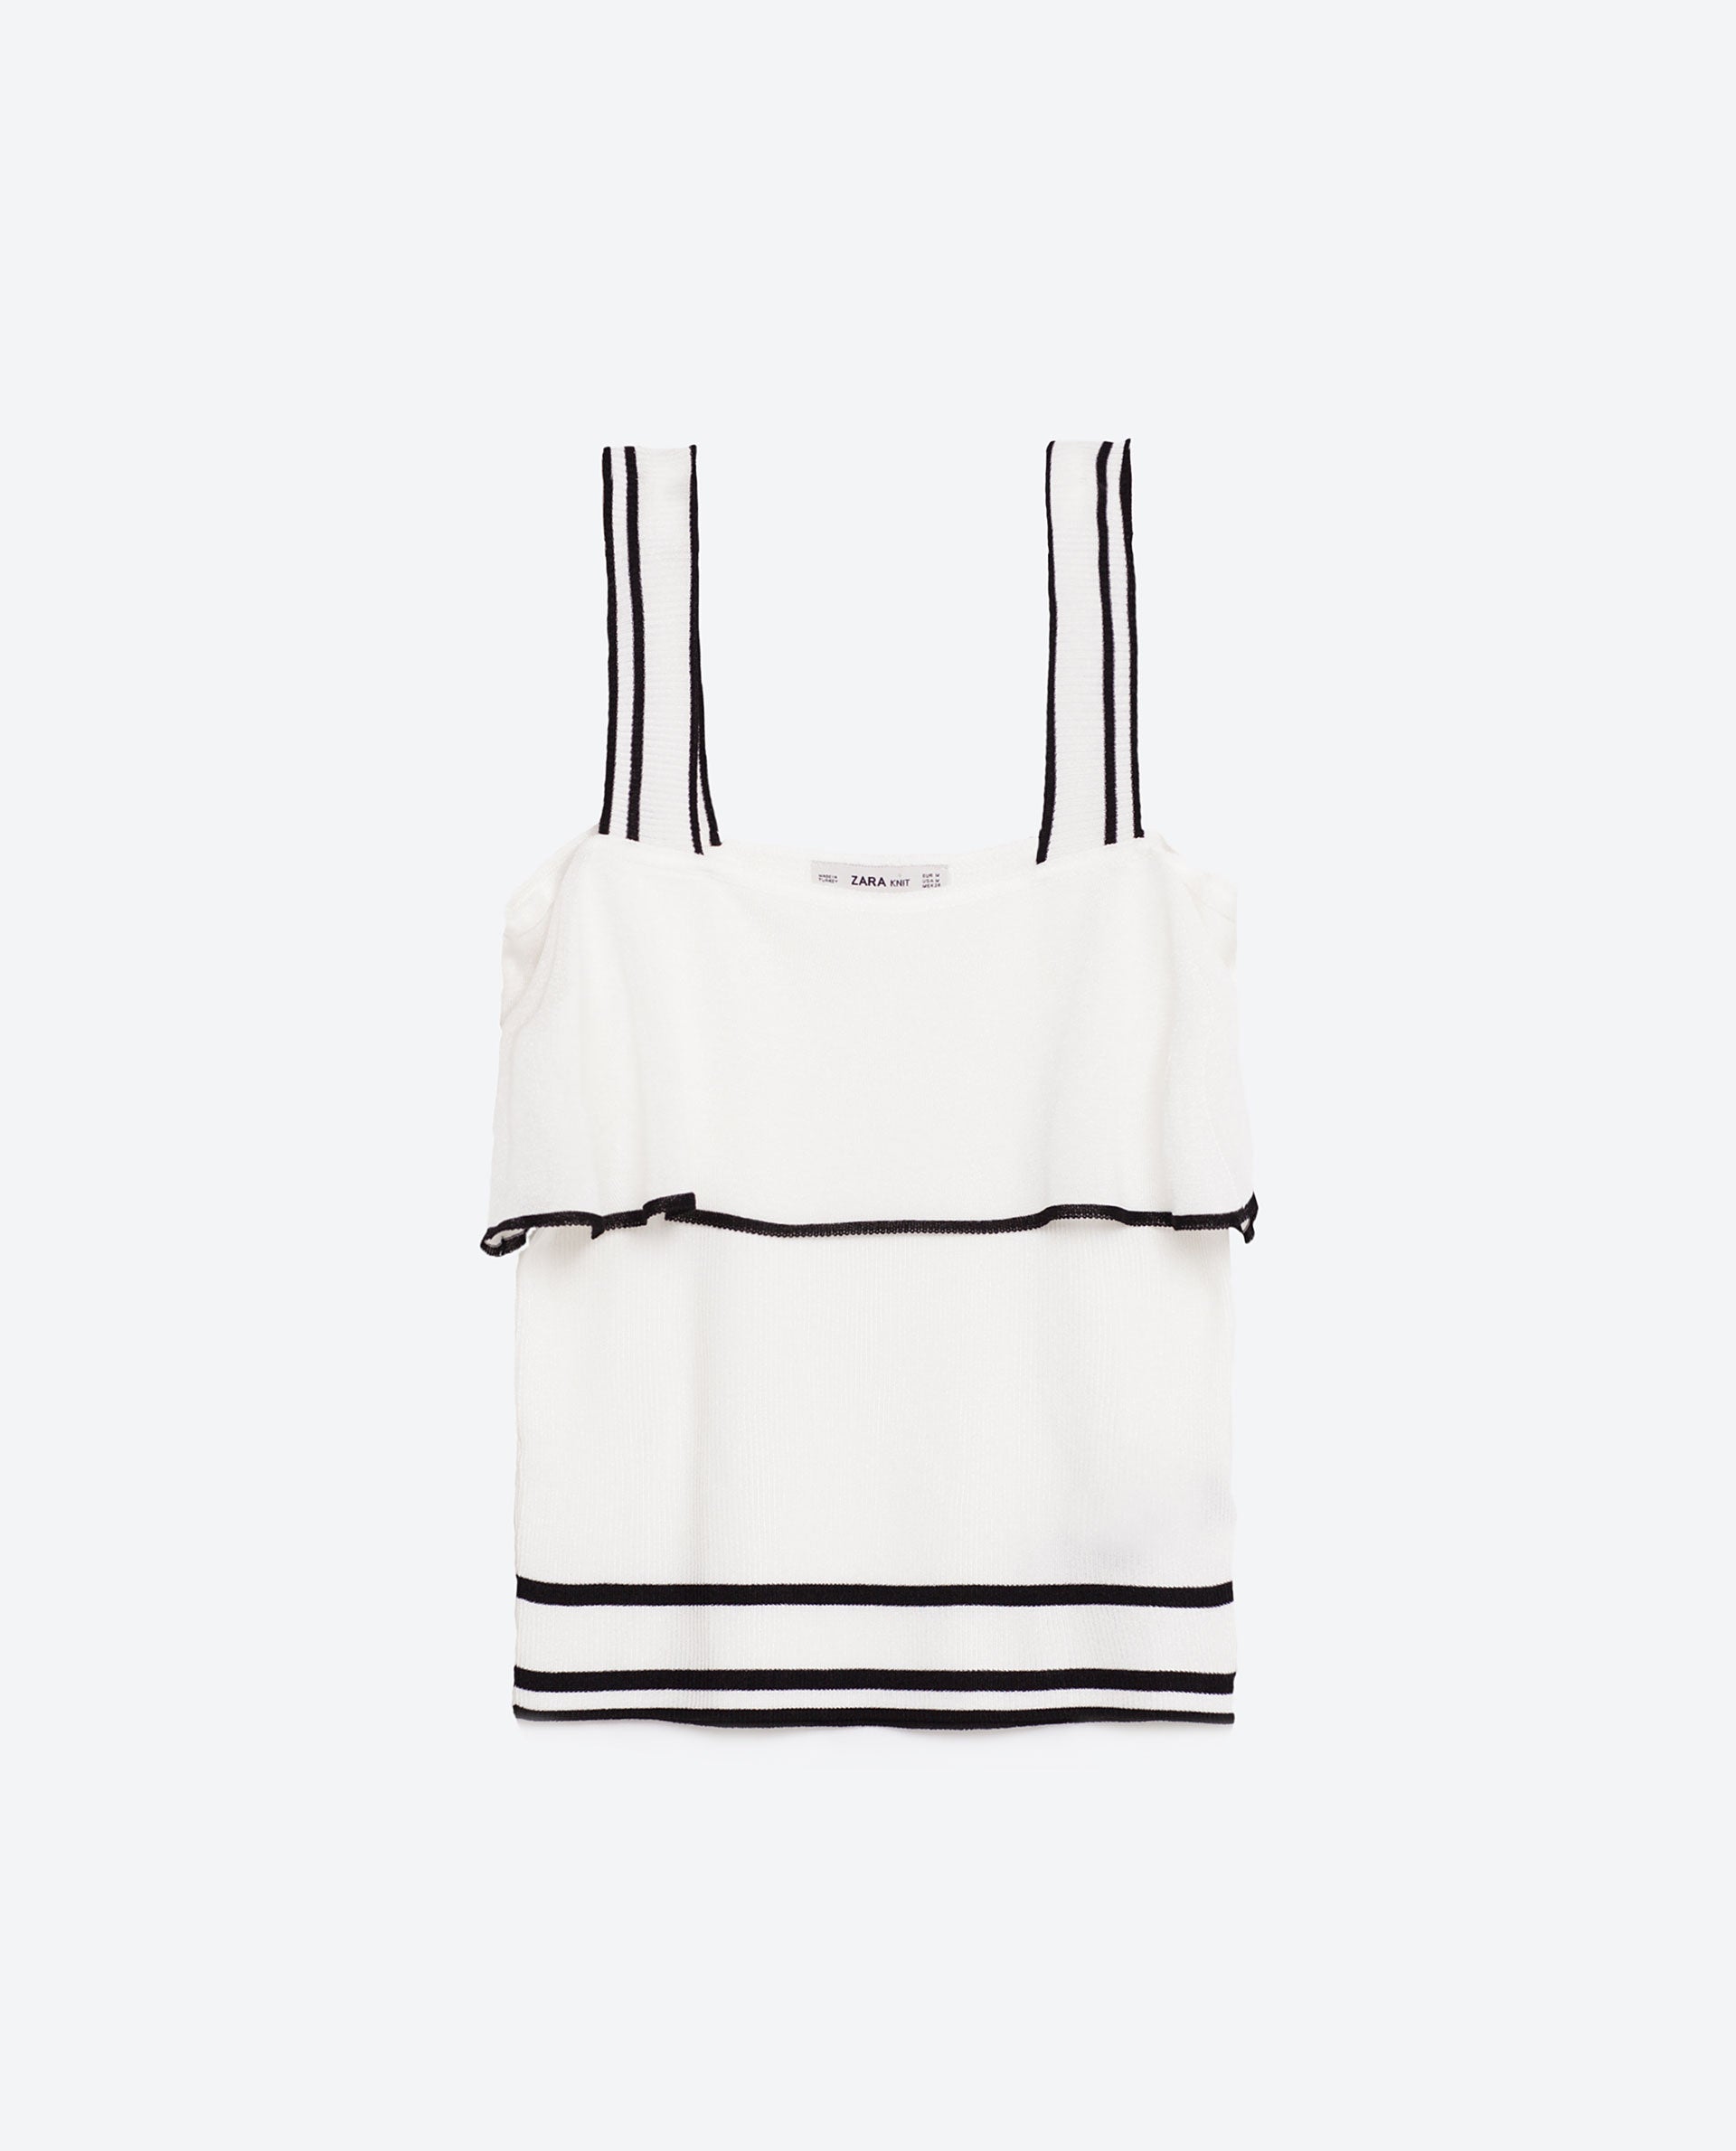 Zara is Having a Crazy Sale, Snag Our Top Picks Before They're Gone!
